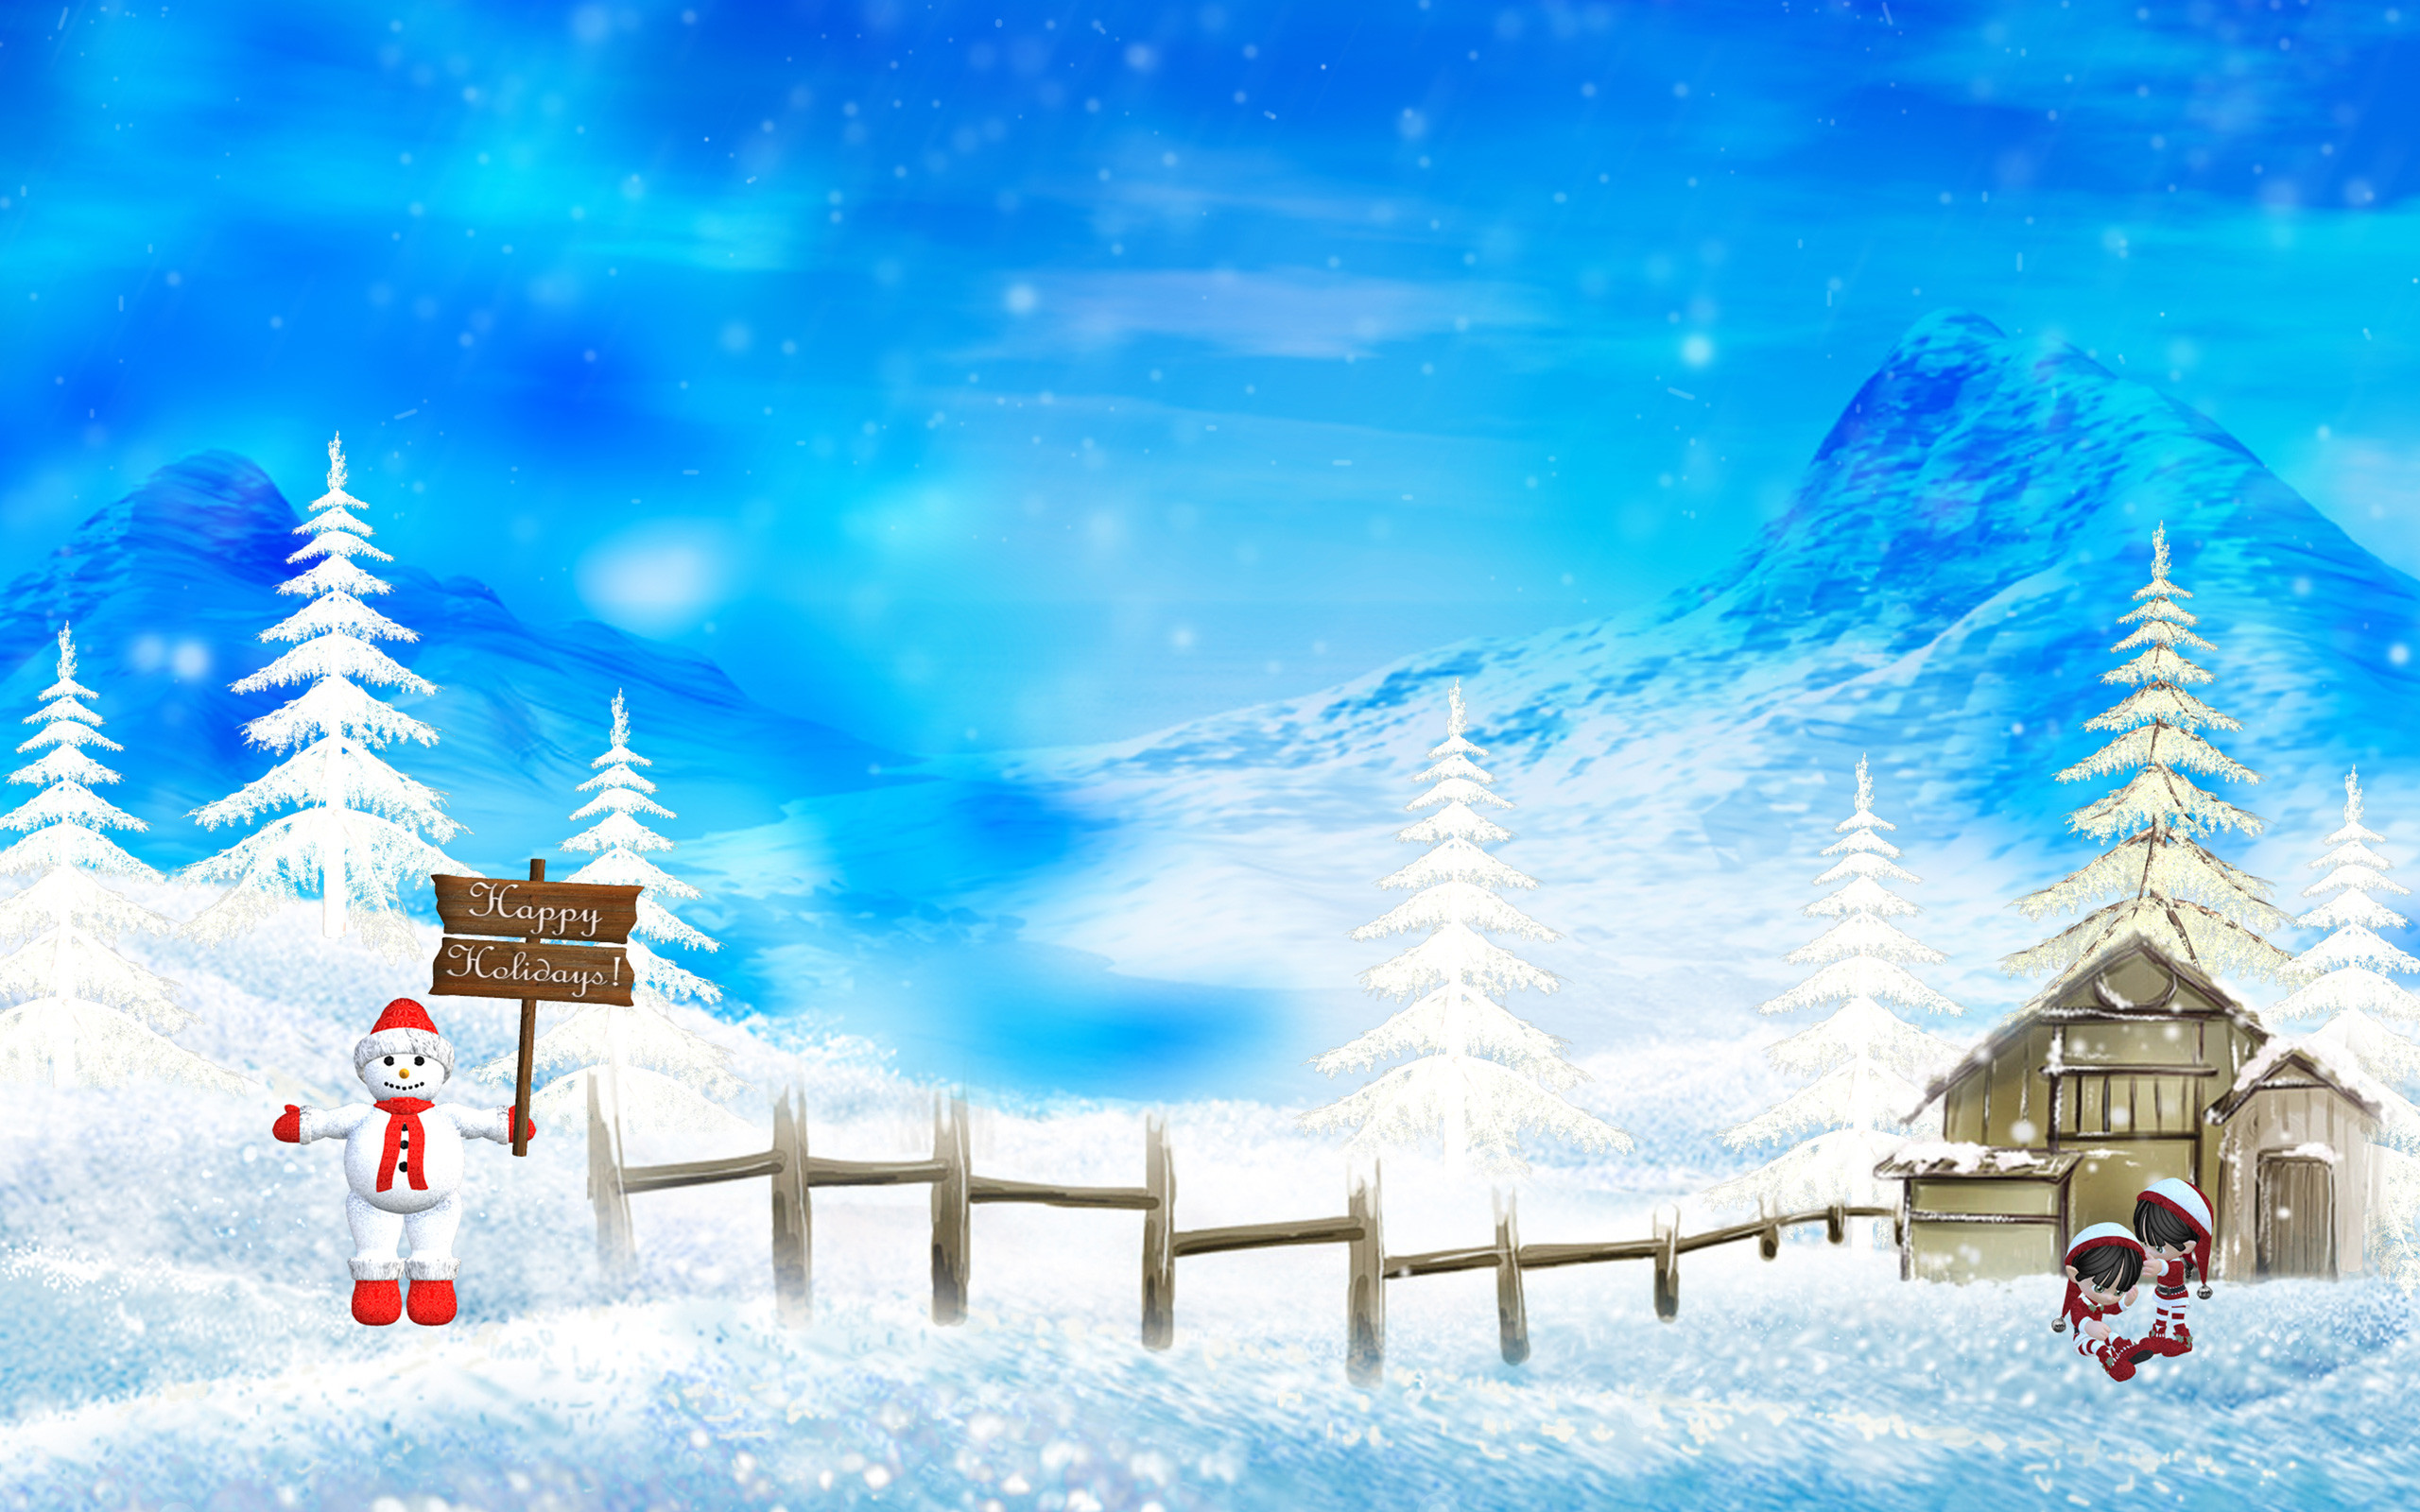 Christmas Snow Wallpaper Scenes (38+ images)